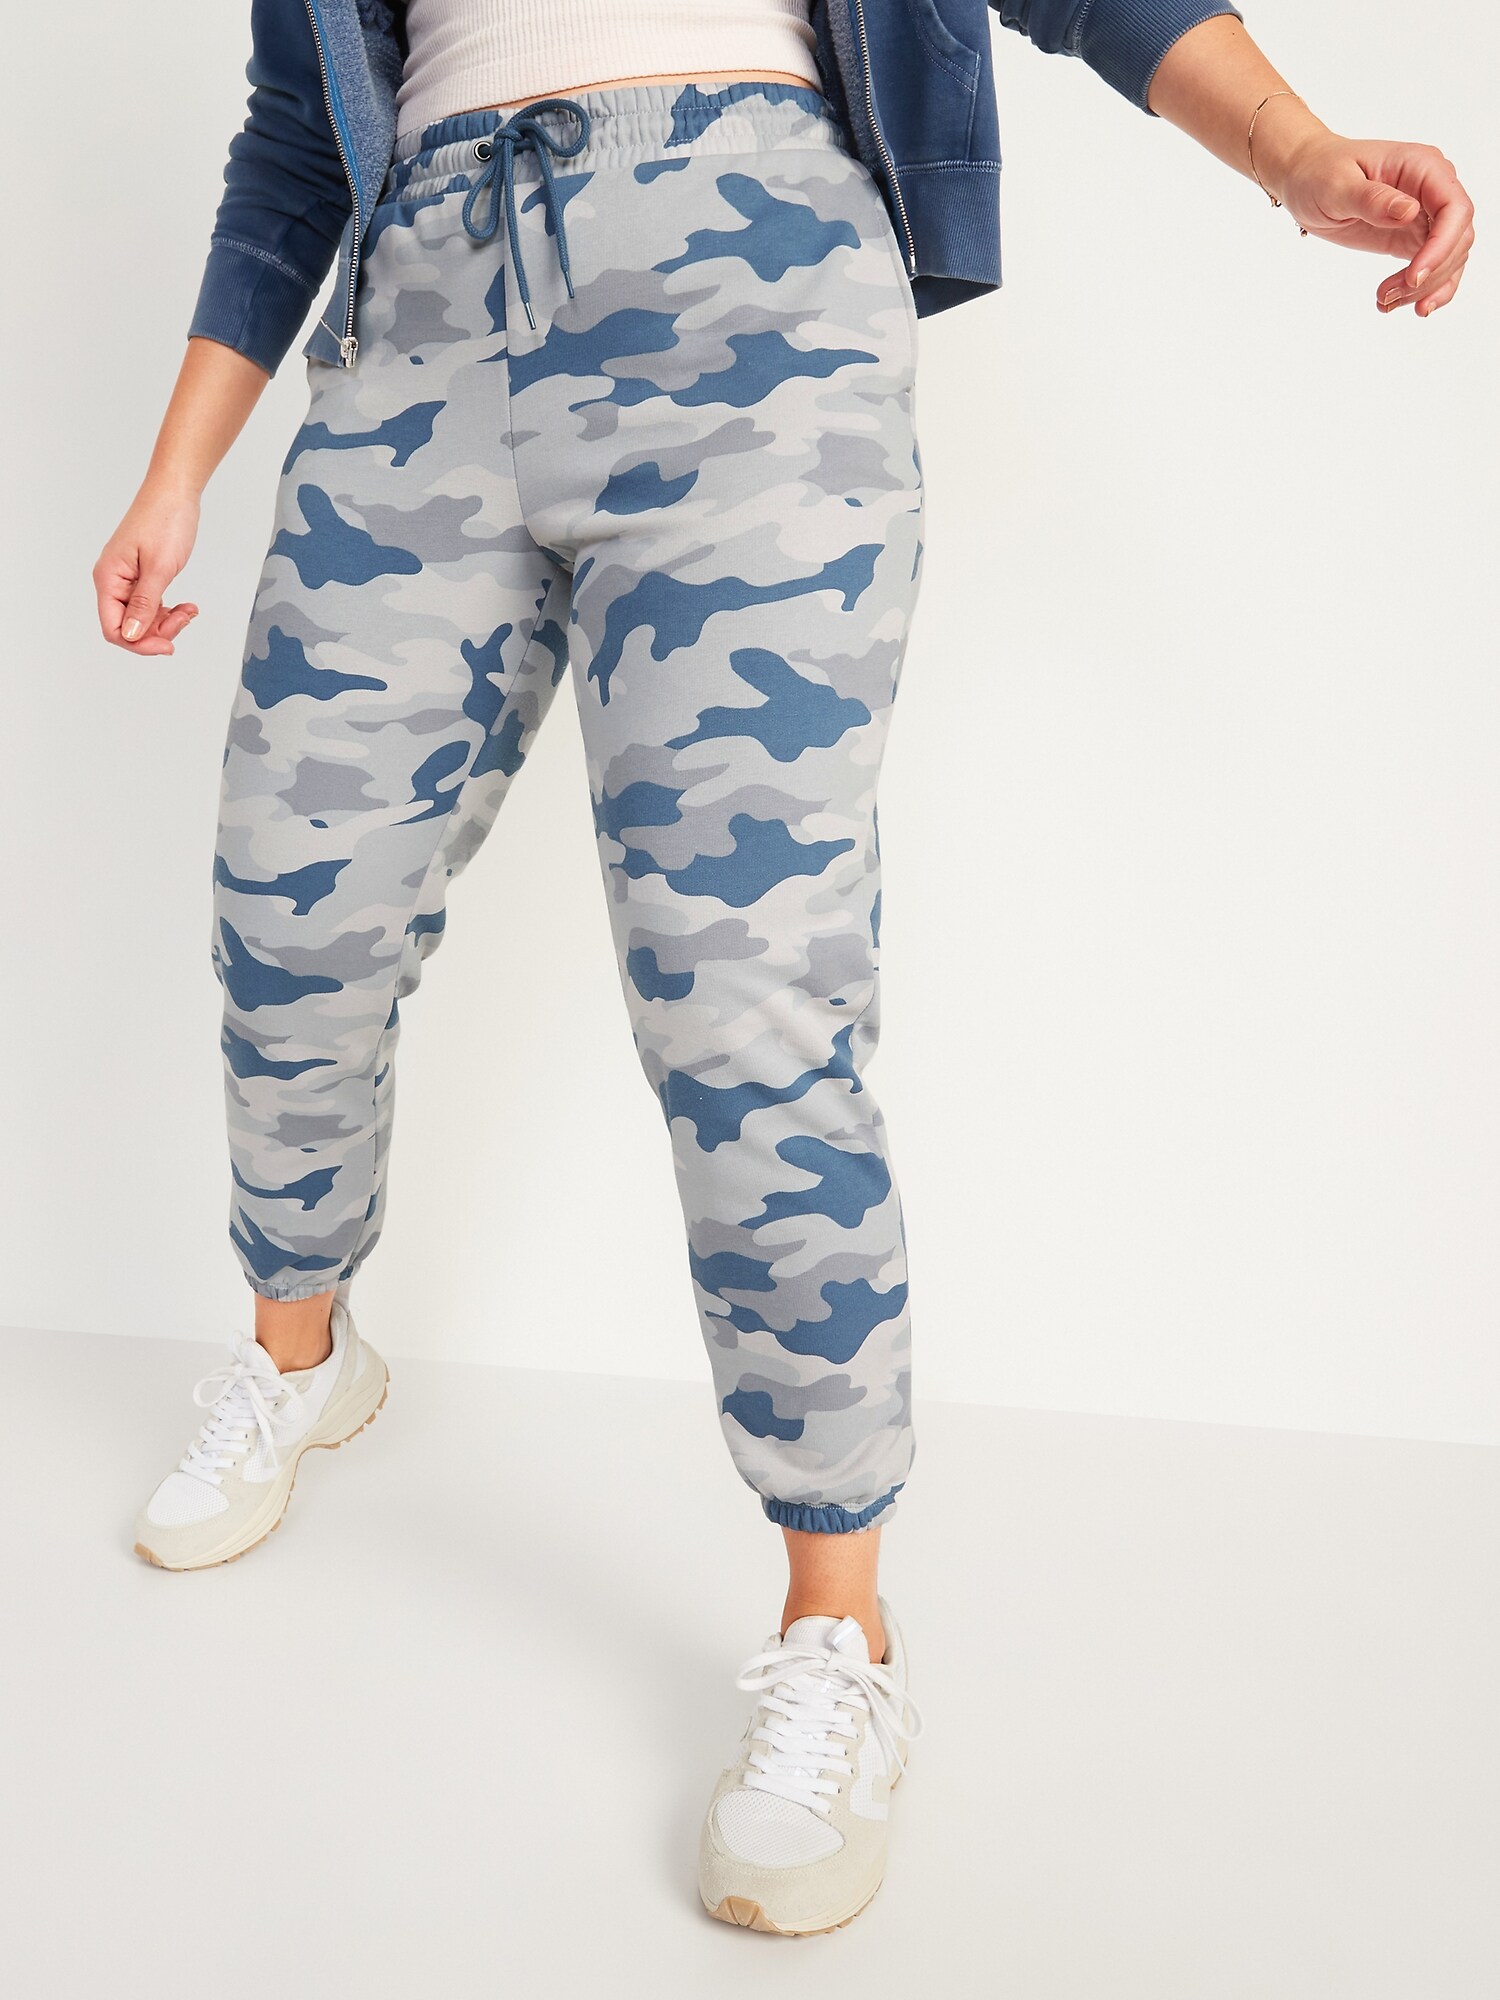 UNACOO Girls Soft Sweatpants French Terry Pull-on Joggers